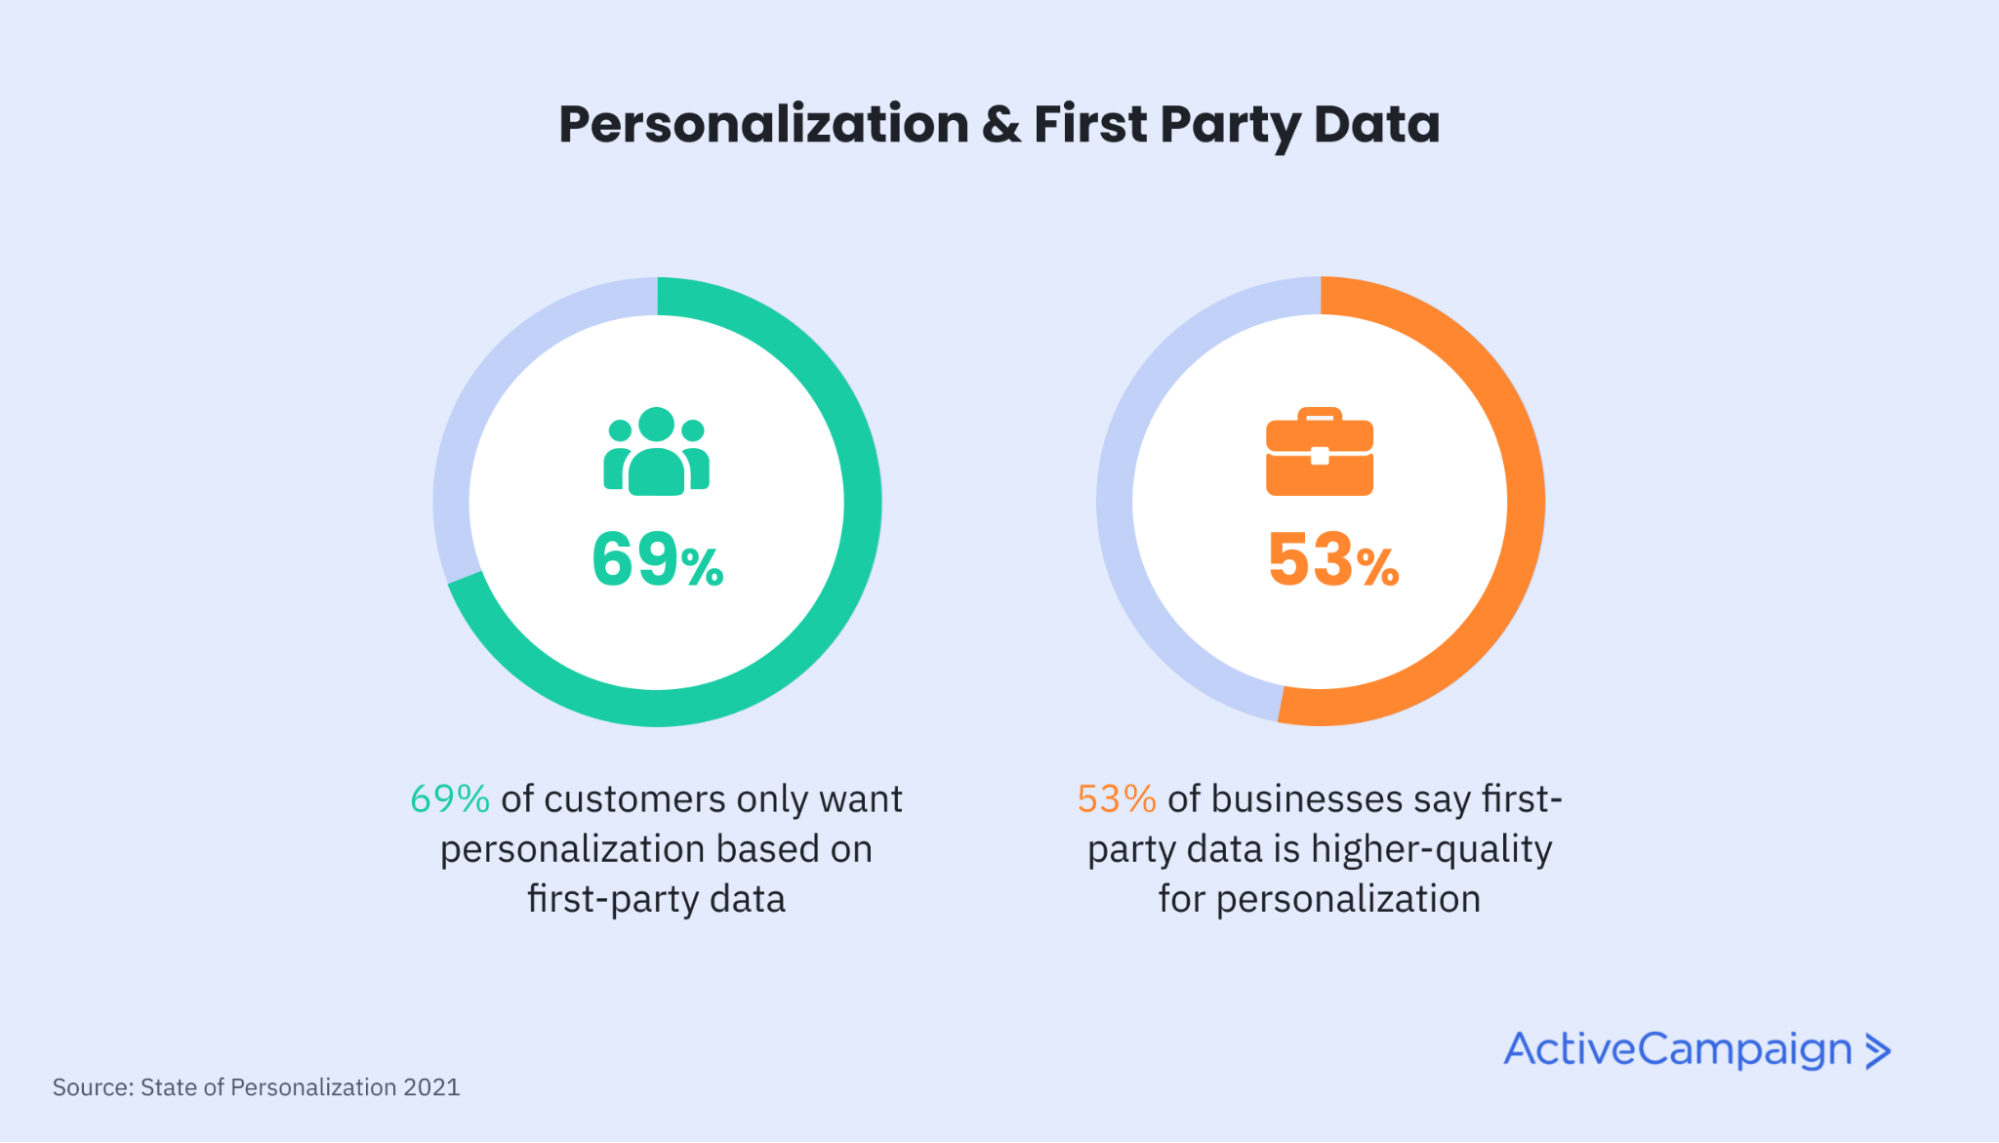 crm personalization and first party data stat saying 69% of customers only want personalization based on first-party data